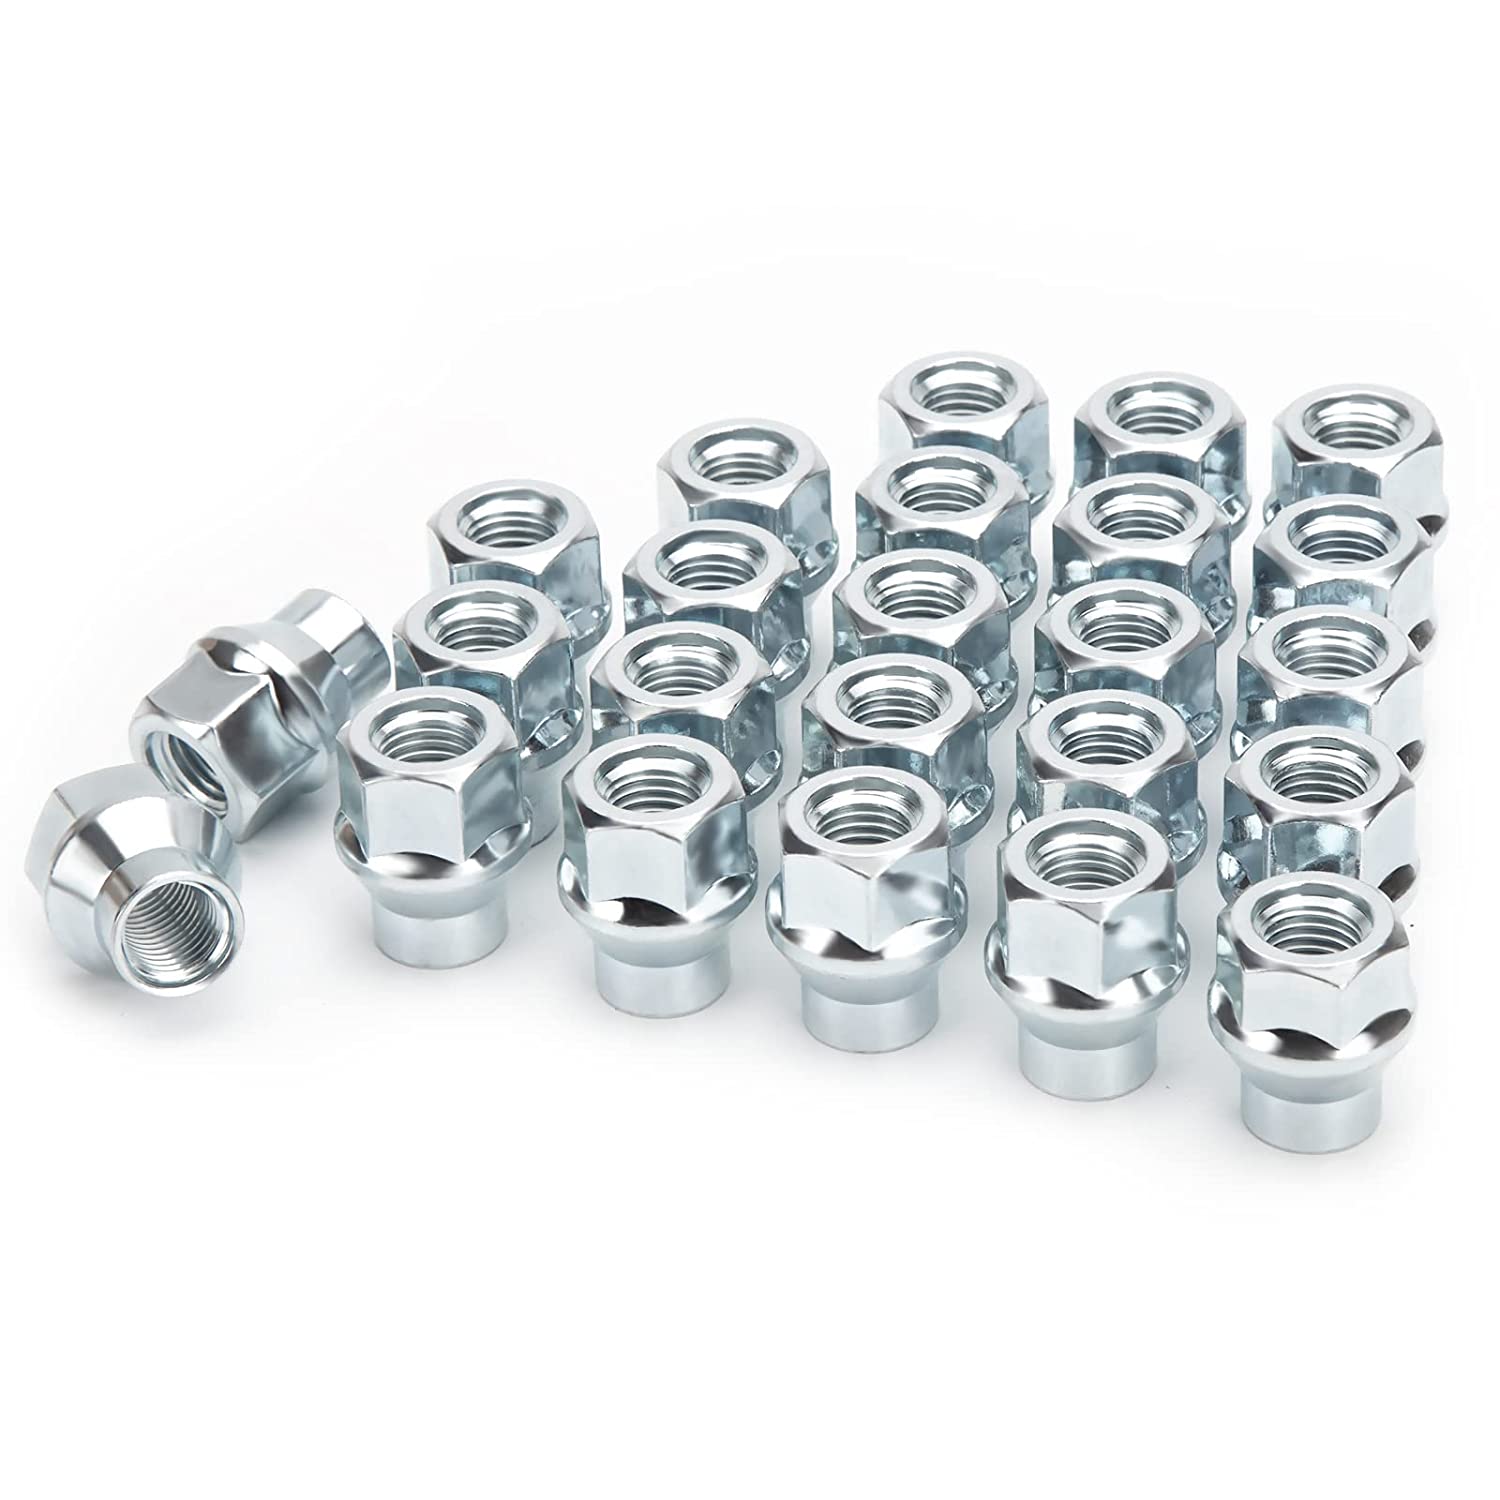 Extened Open End Lug Nuts 12x1.5 24Pcs 7mm Shank For Toyota Lexus-1